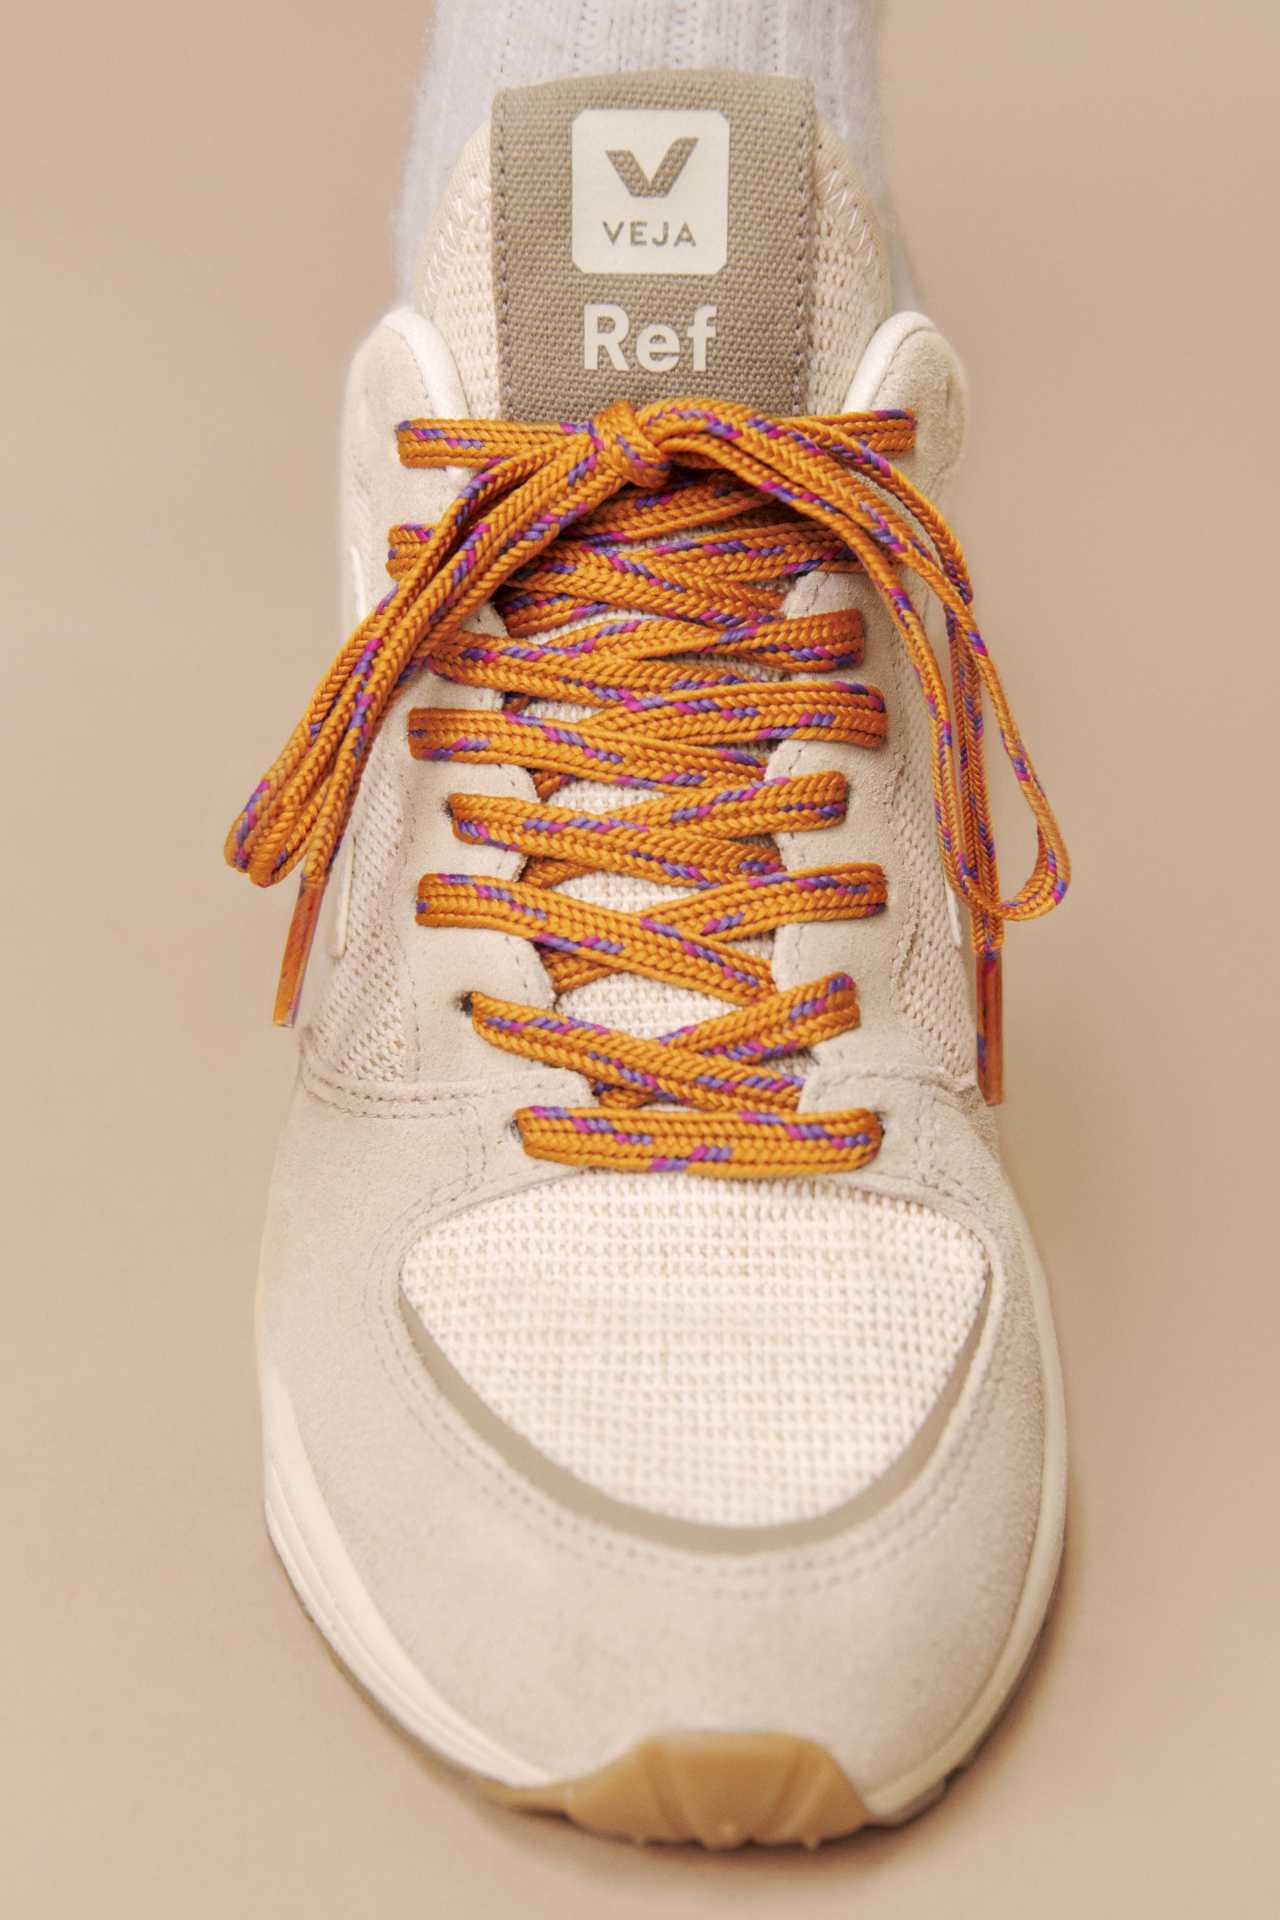 Veja X Reformation Sneakers | A view of sneakers from above the laces